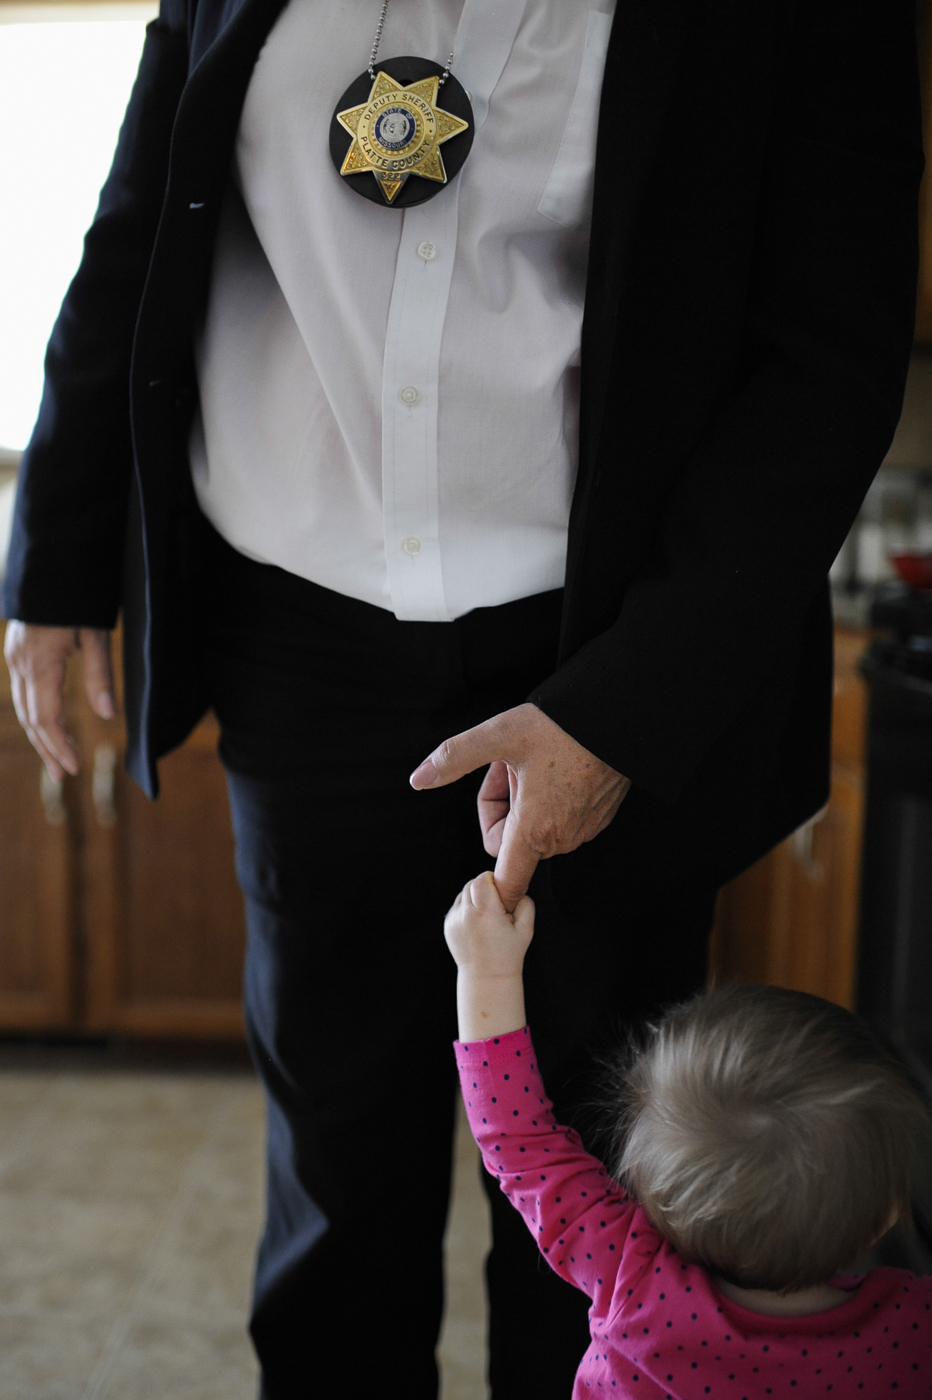  With so much time spent at work, Detective Penrod relishes the moments she can spend at home with her grandchildren.    